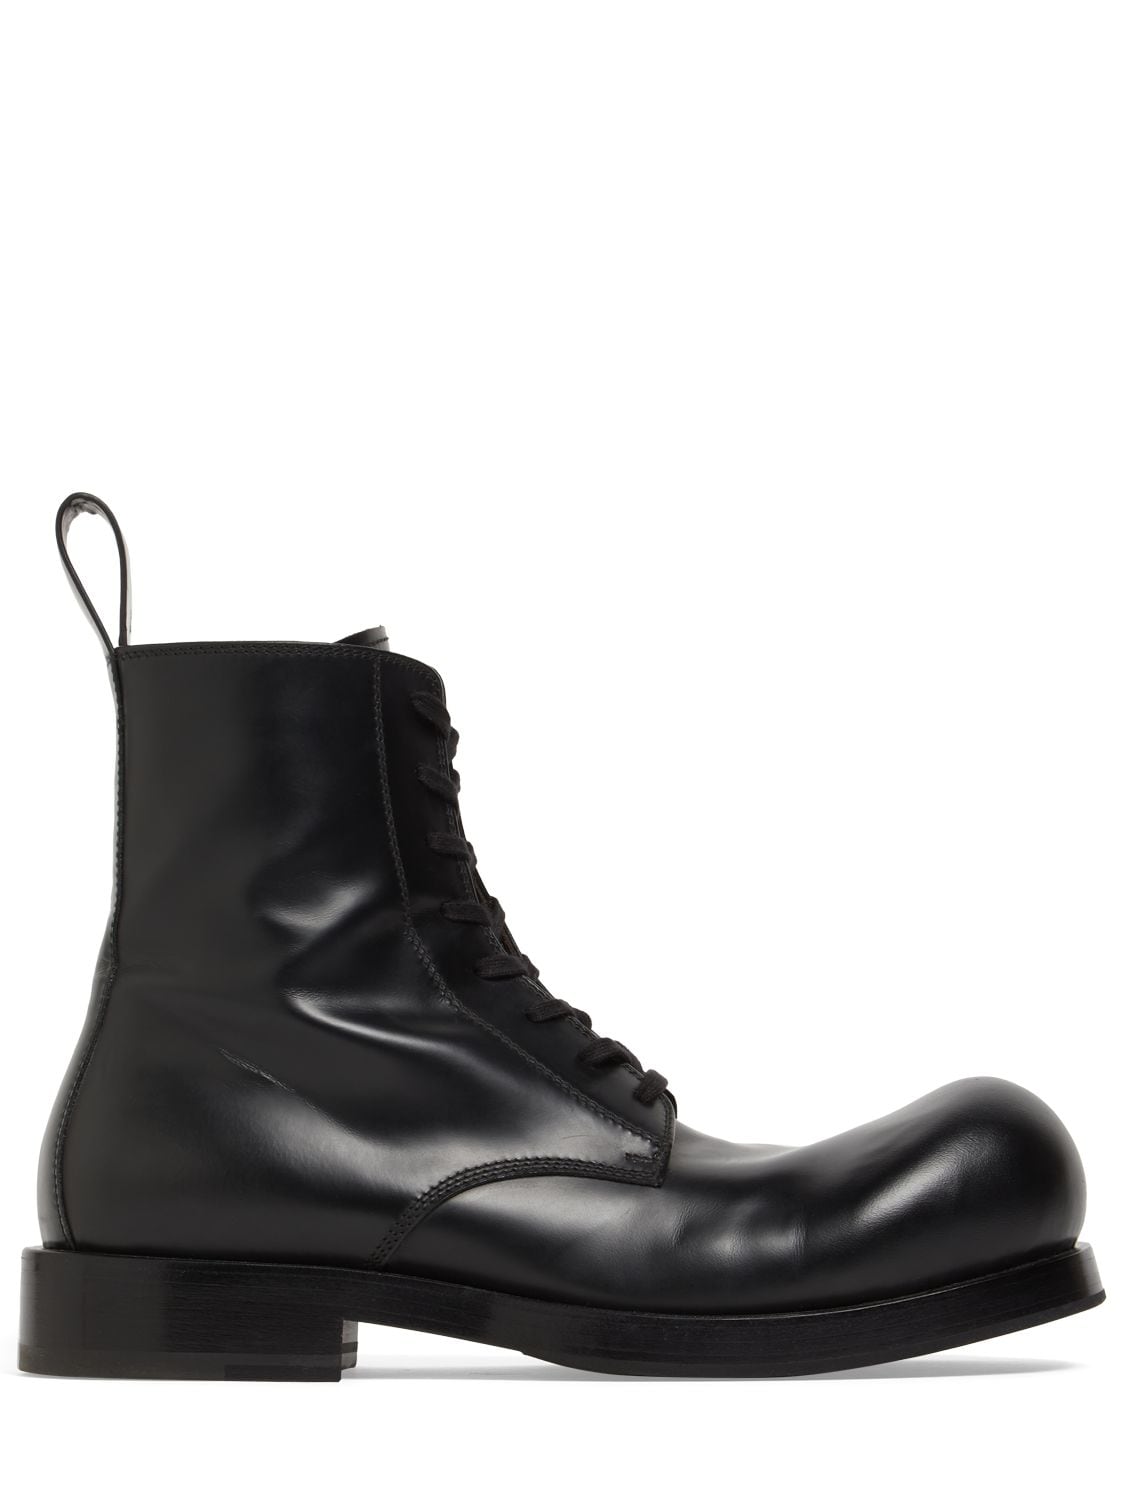 40mm Goofy Leather Ankle Boots